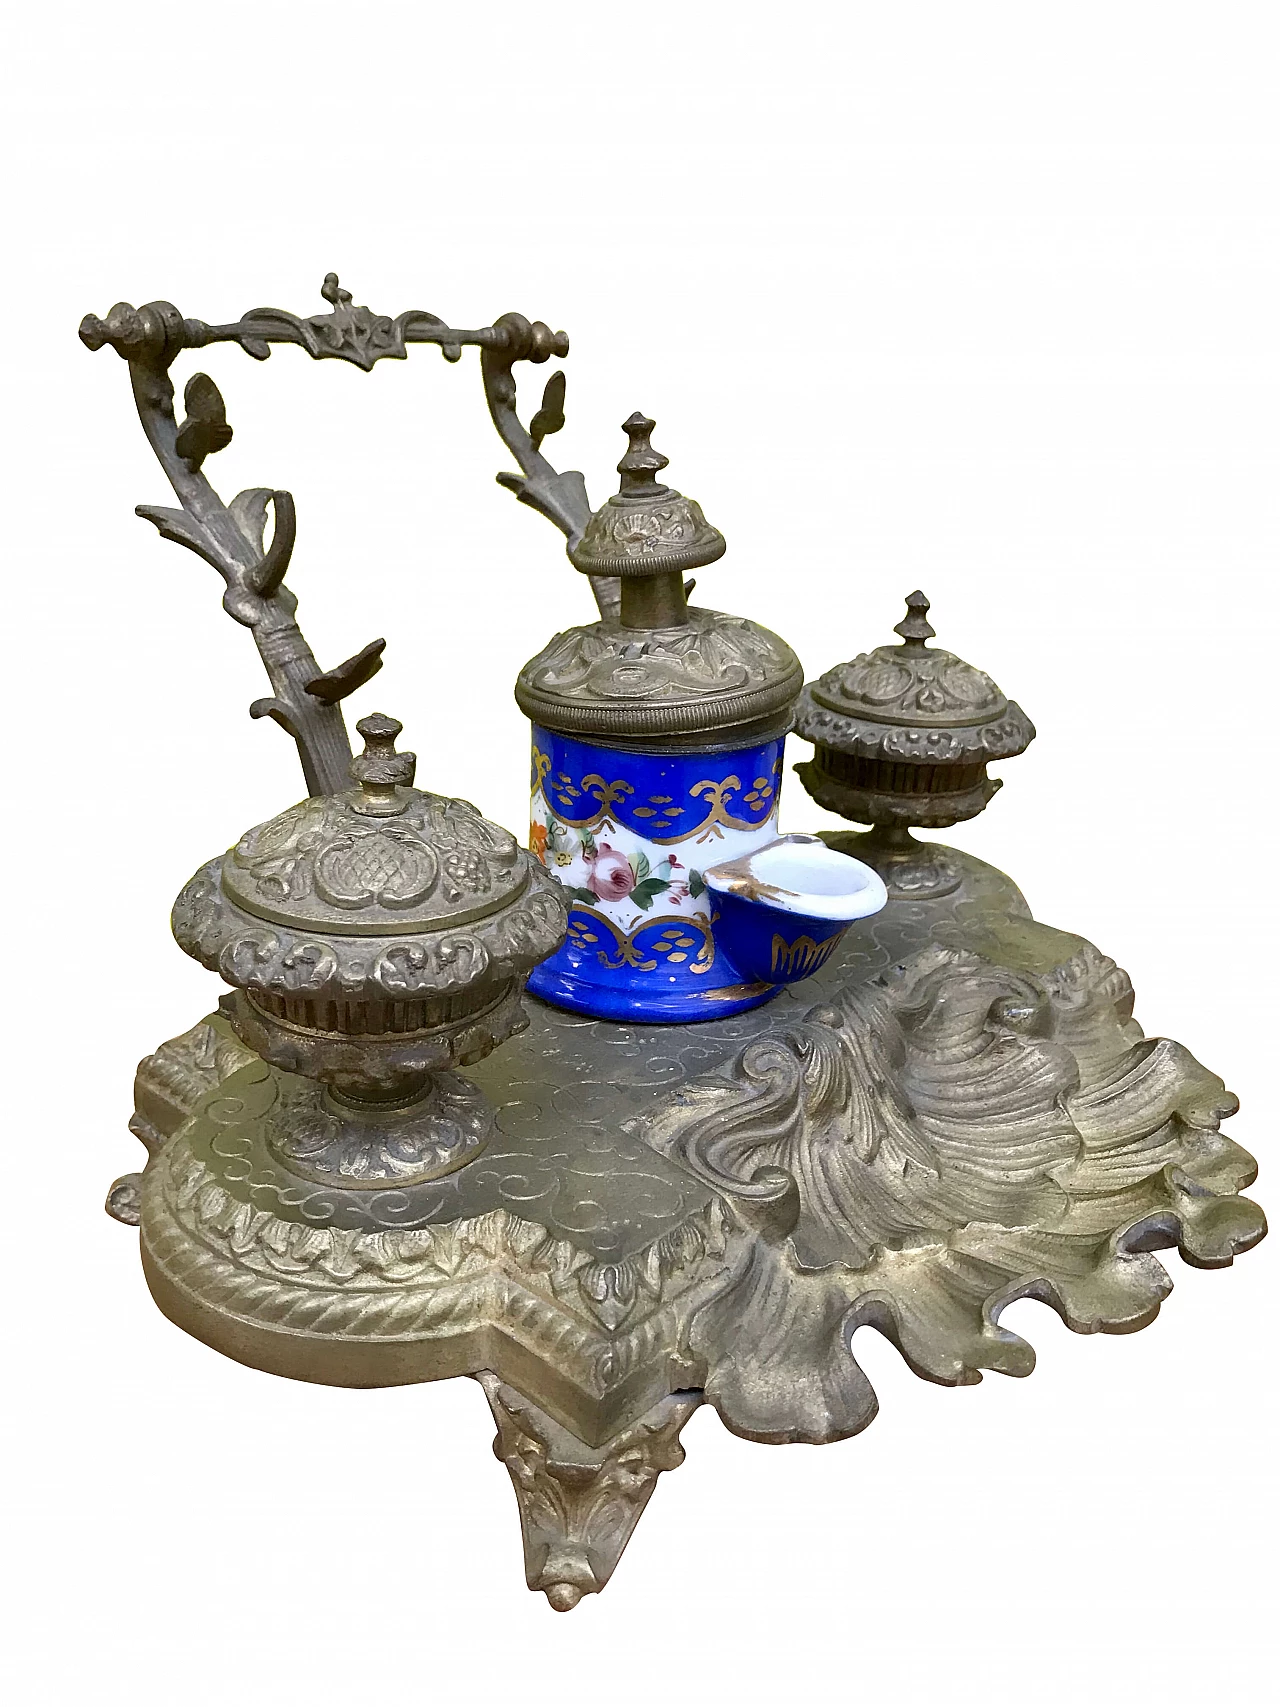 Sevrès porcelain and bronze inkwell with Pen Holder, 19th century 1169130